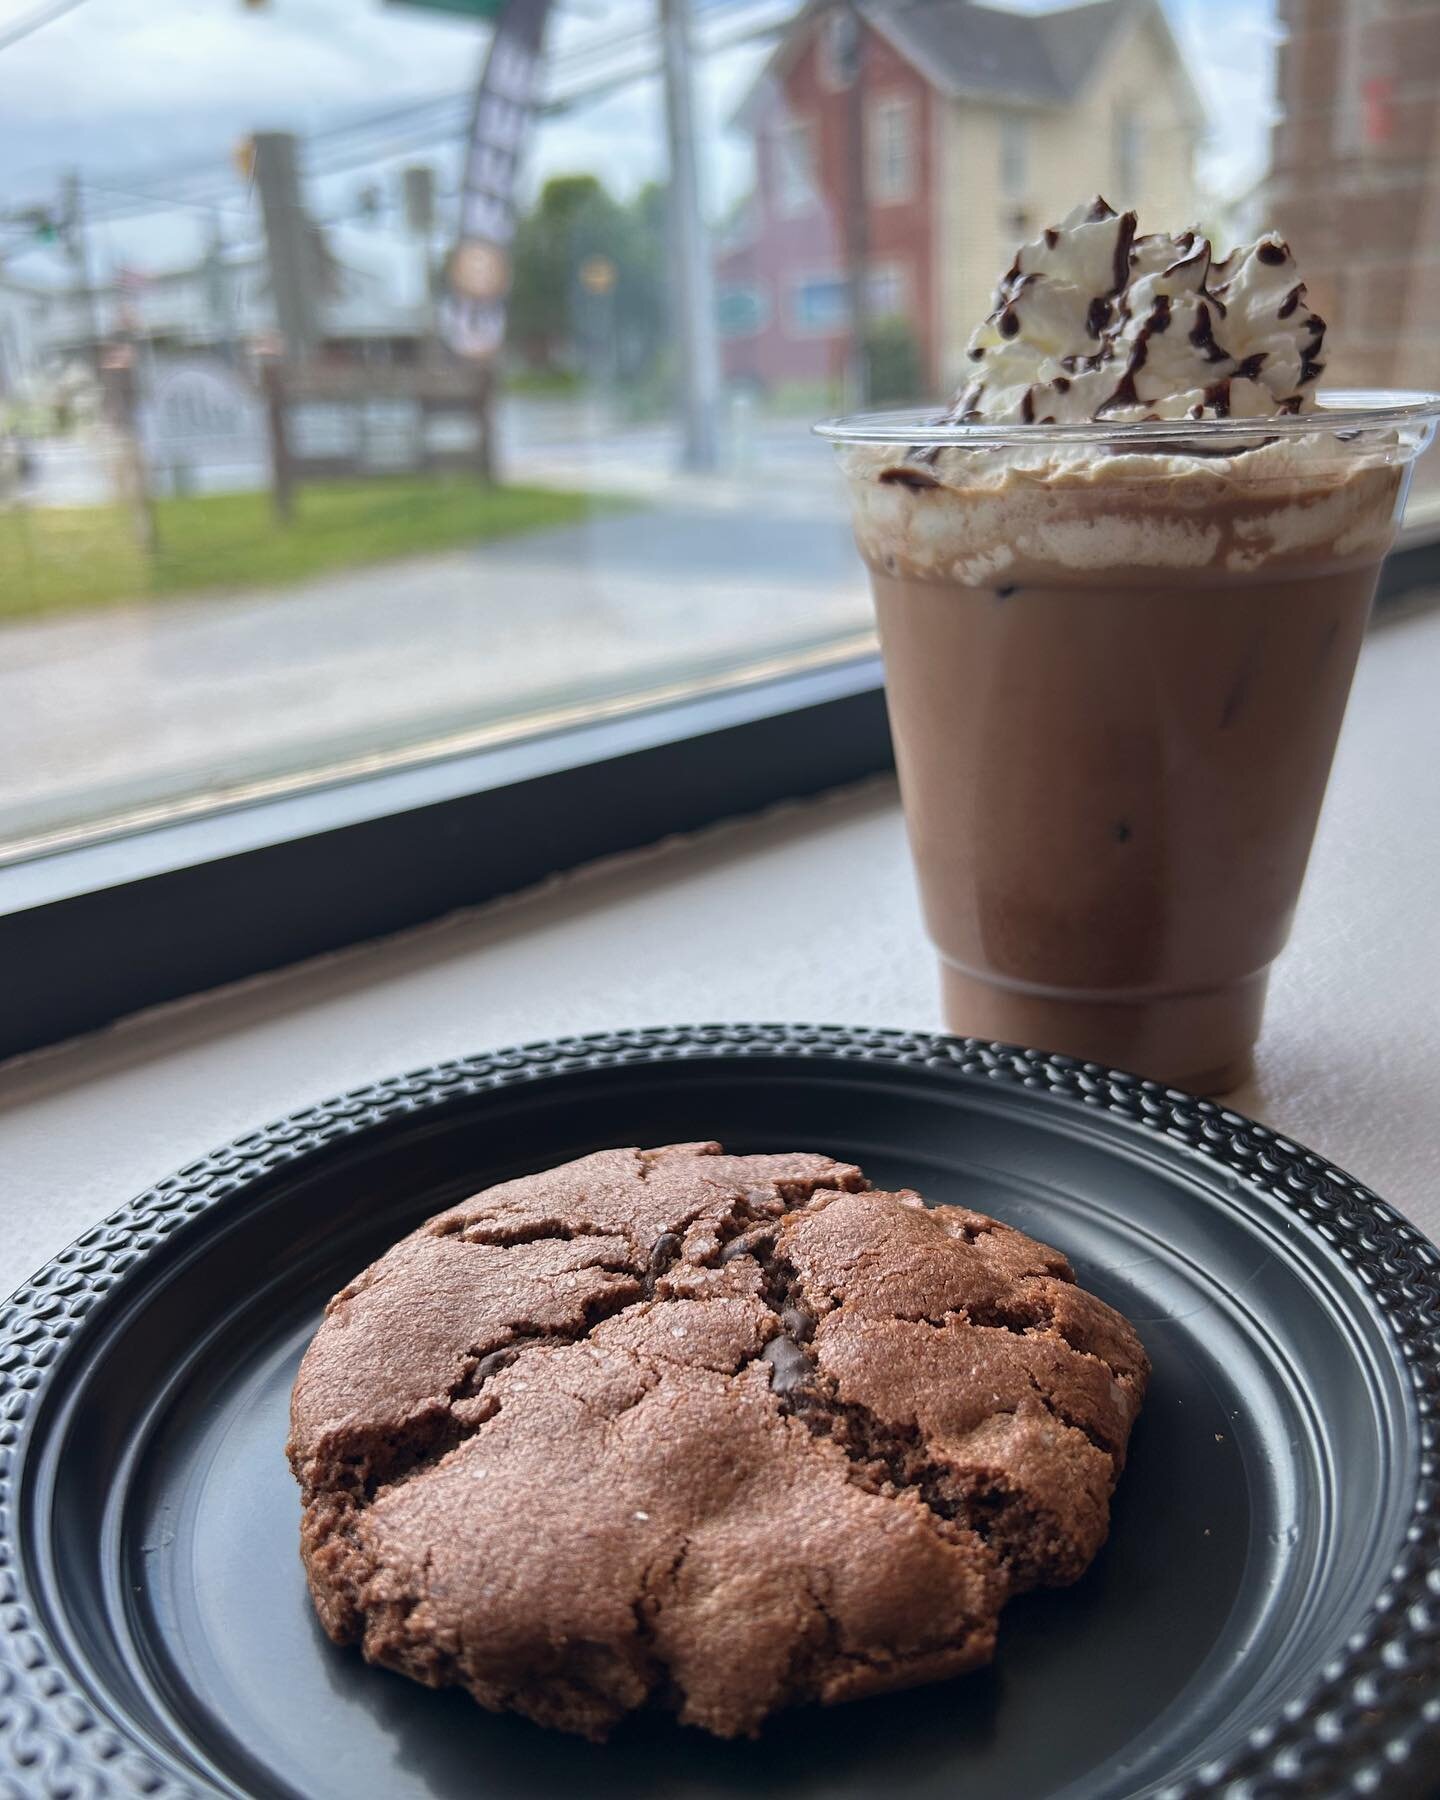 The perfect pair🍫☕️
Our famous mocha latte is made with @askinosie chocolate, and what better to pair it with than our new Askinosie chocolate cookie😋

Open 7-3: Monday-Saturday 

#fikacoffeebar #newcookie #chocolate #mocha #latte #coffeebar #fika